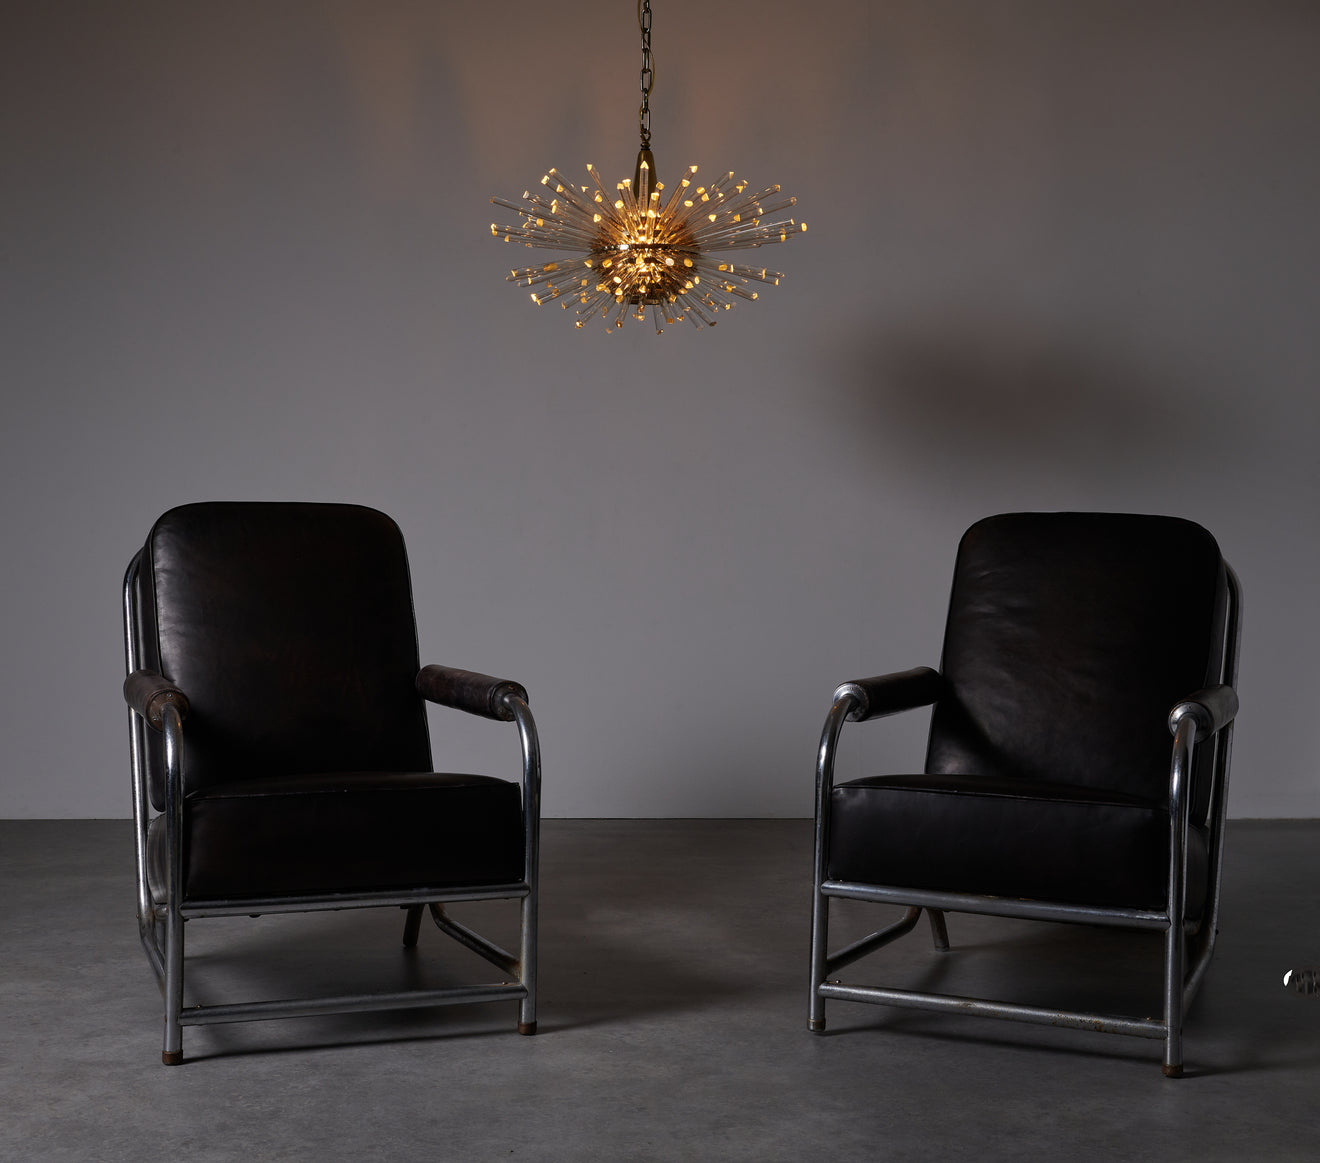 PAIR OF CHROMED ARMCHAIRS IN THE STYLE OF DONALD DESKEY FOR LLOYD